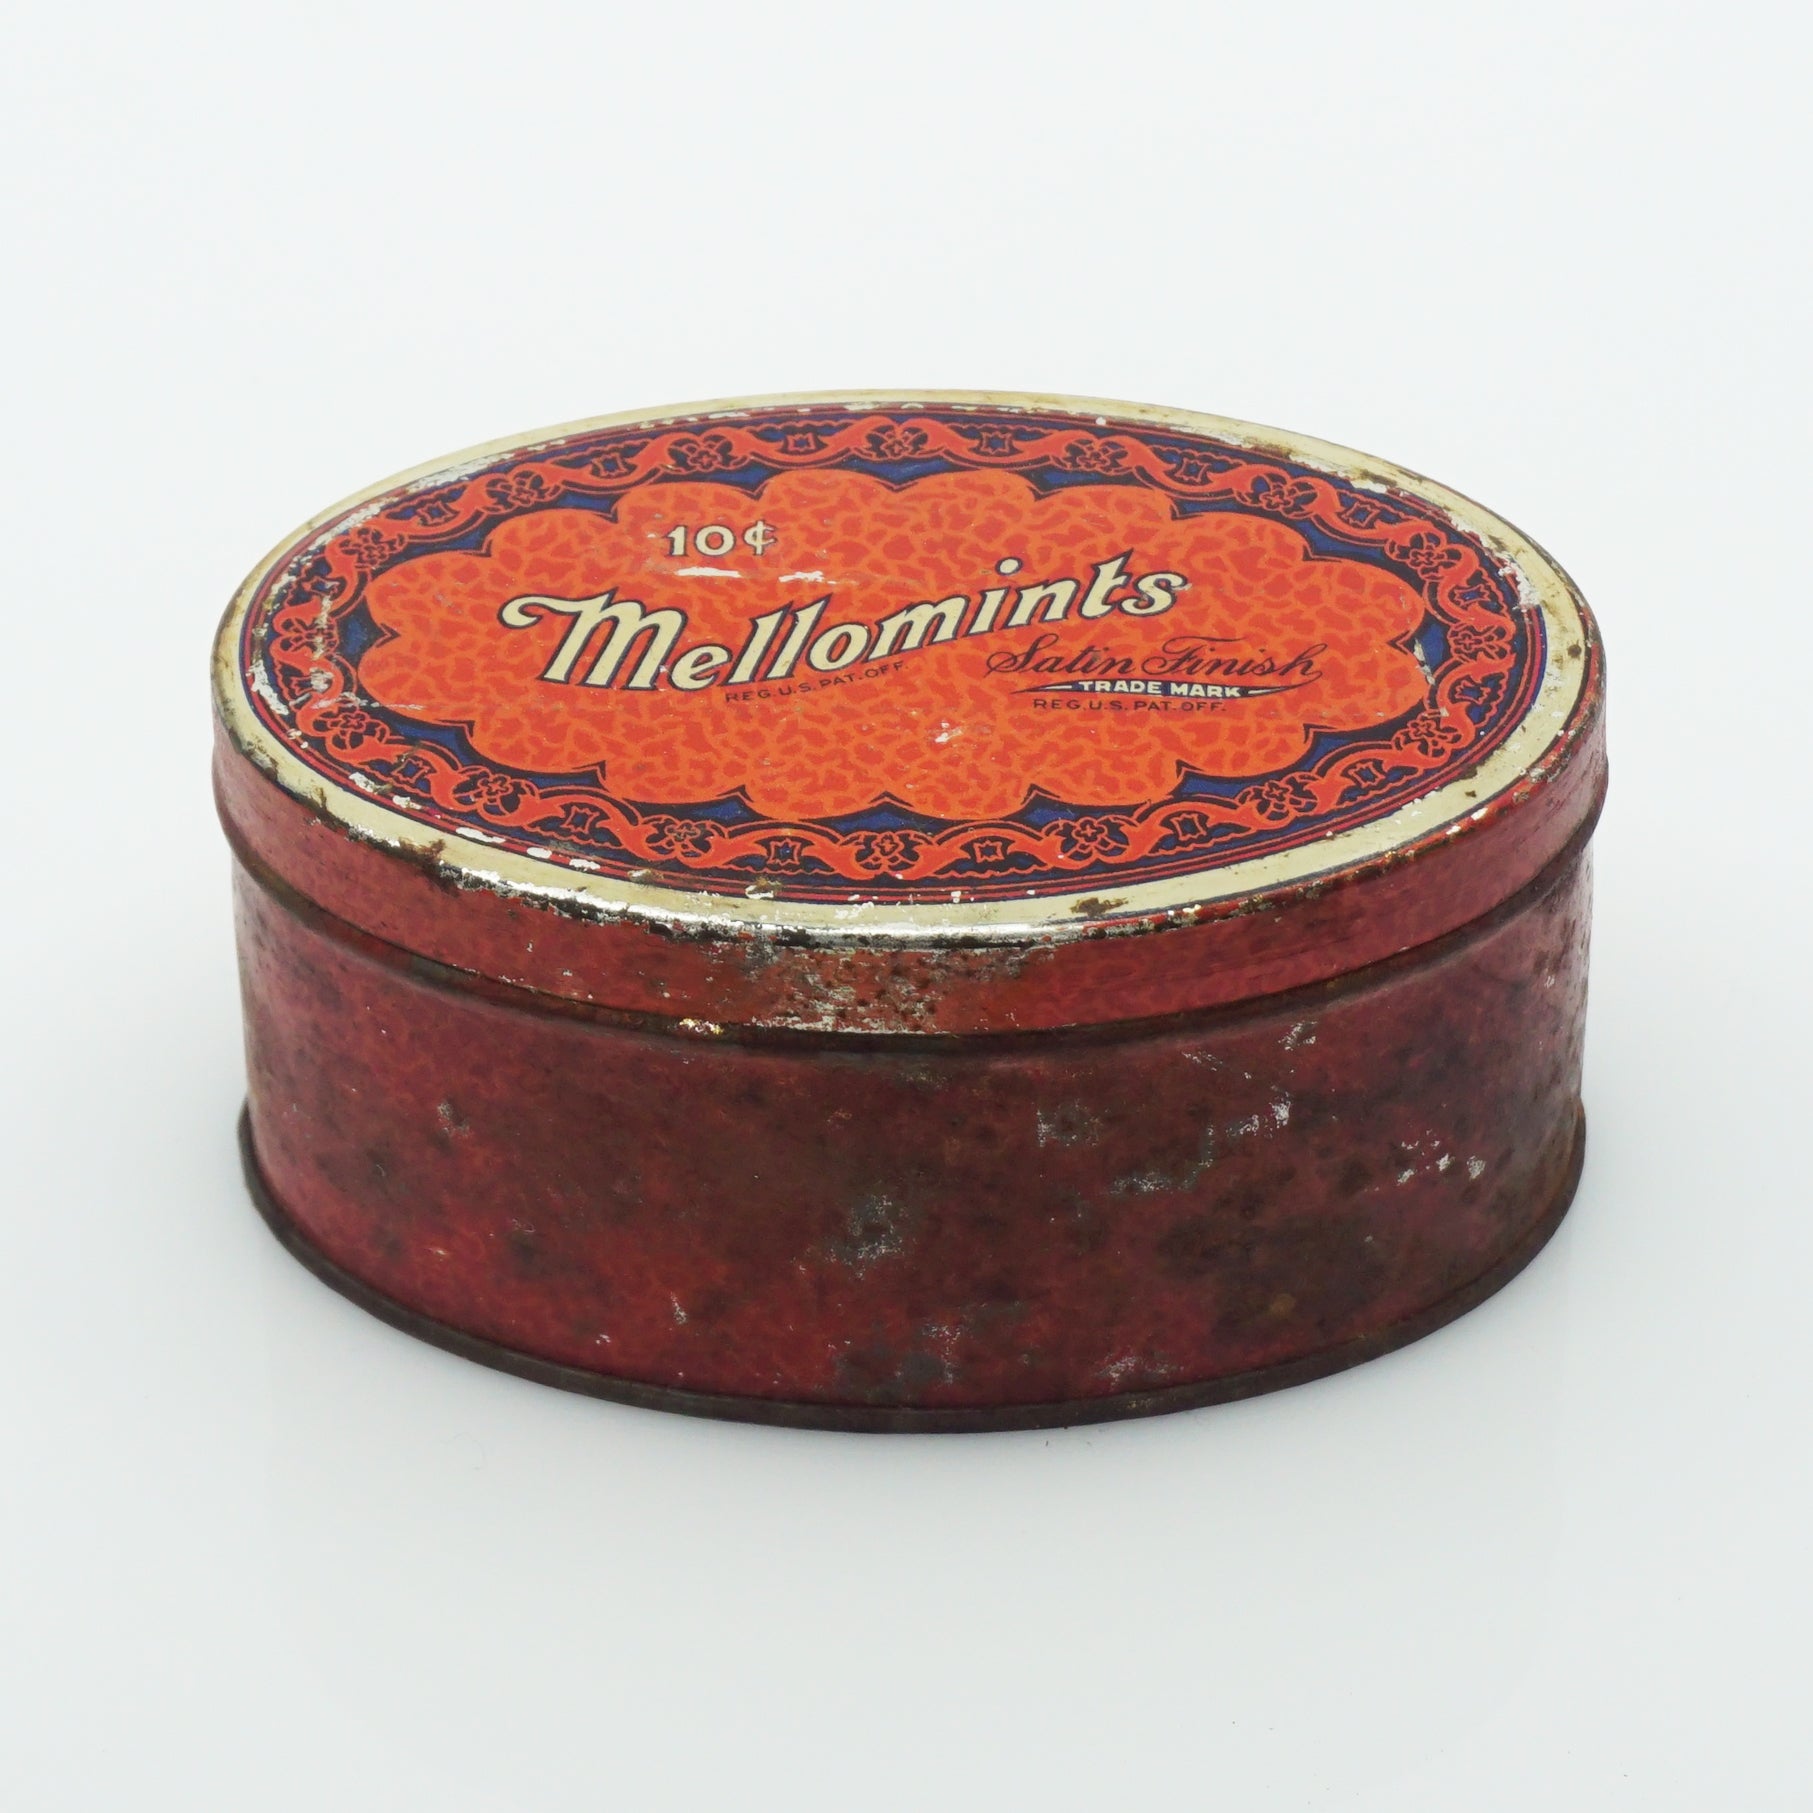 Vintage Brandle & Smith Co. Mellomints Candy Tin Litho Container. 4" Wide.